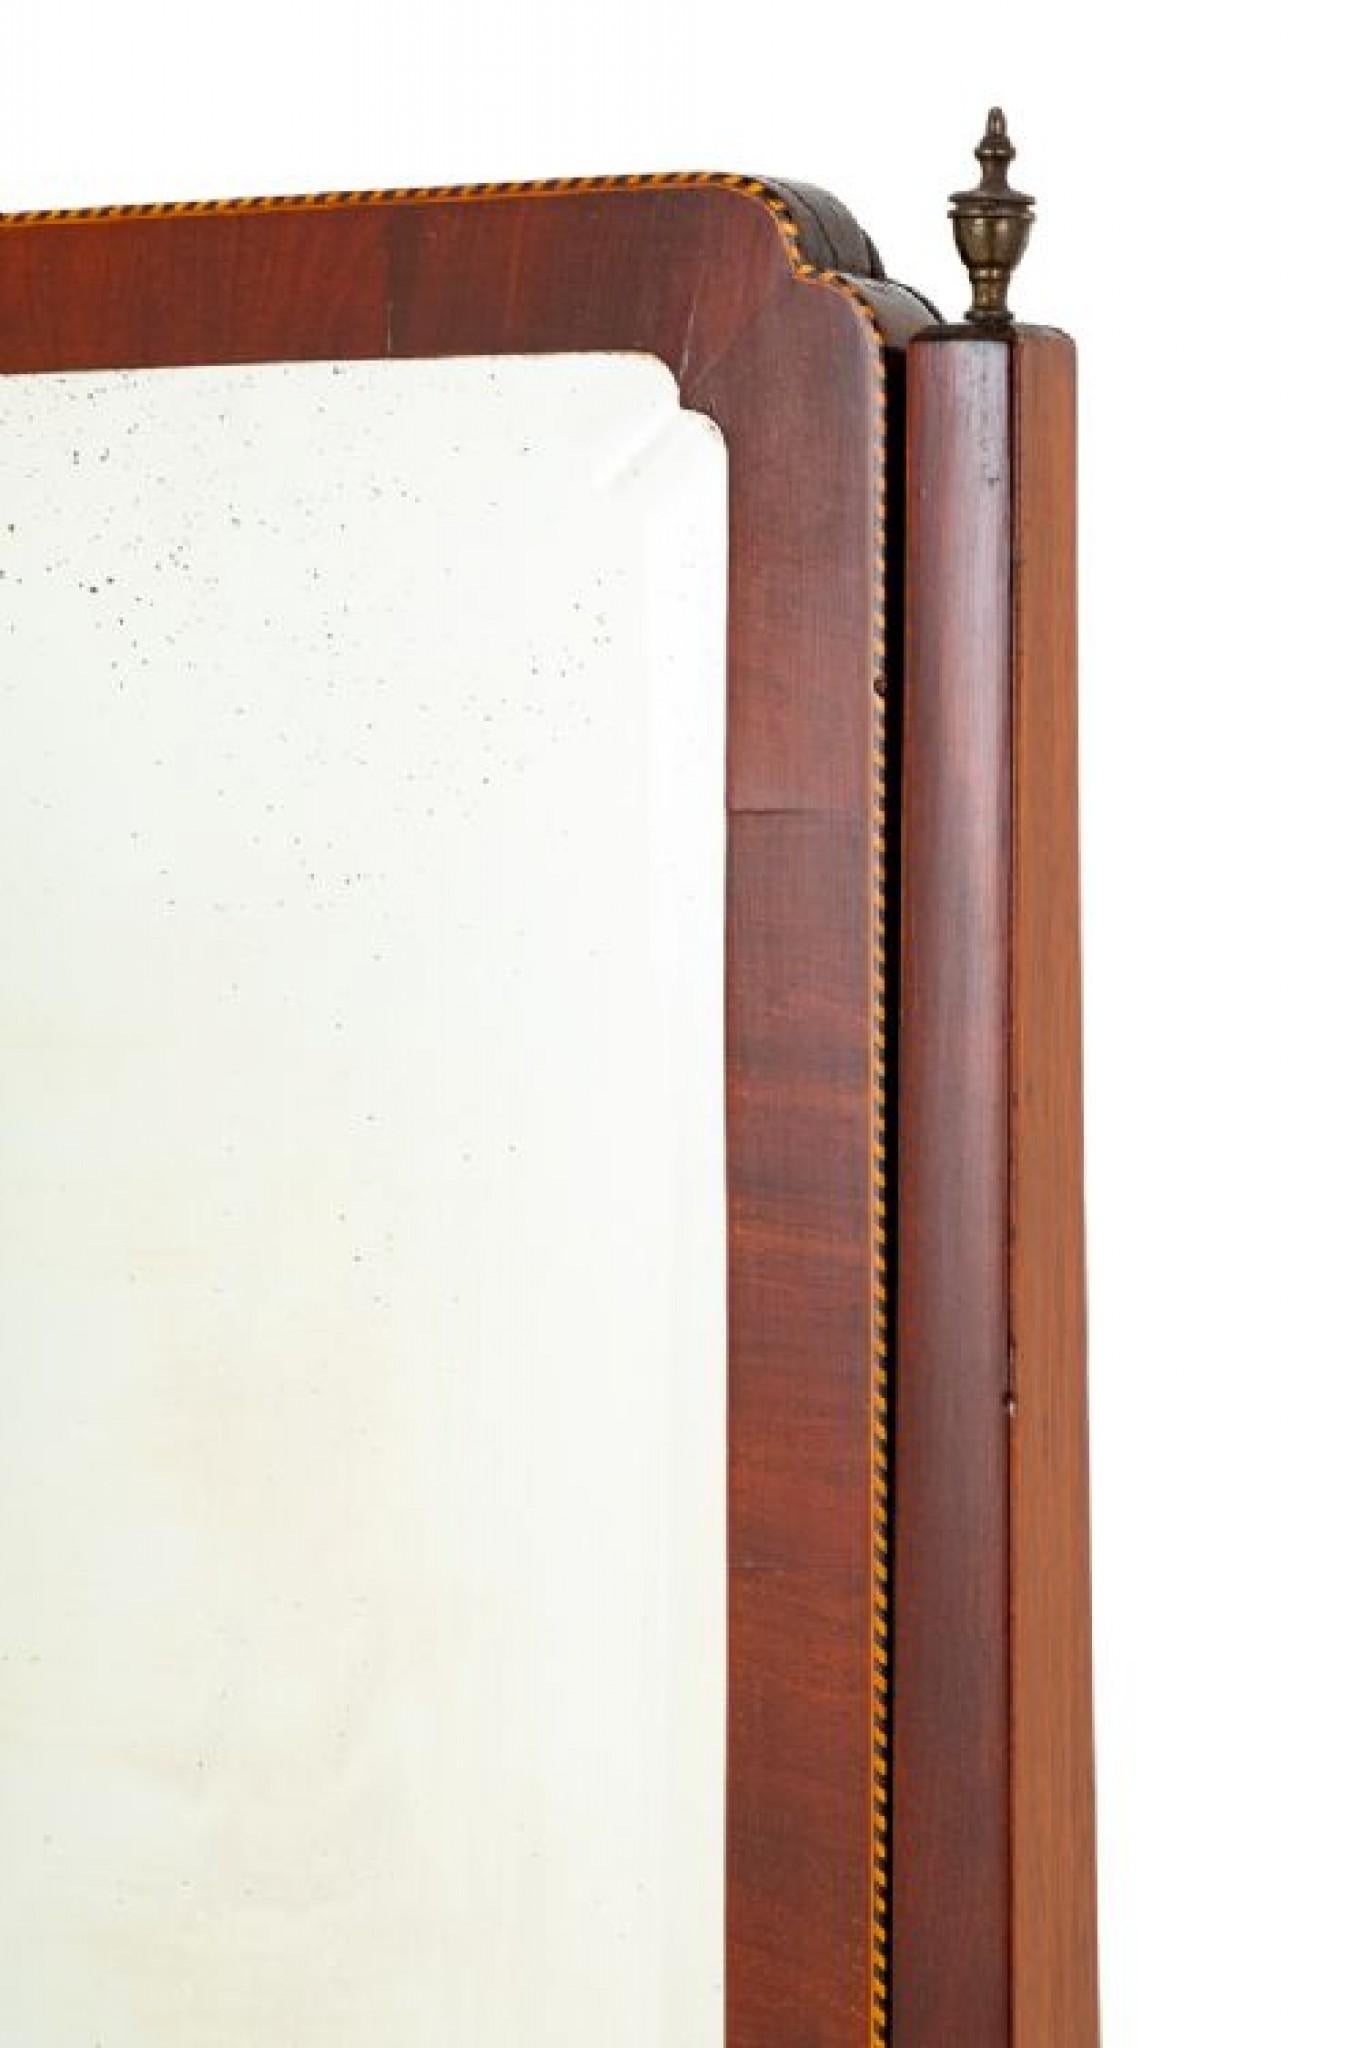 Elegant Sheraton Revival Mahogany Cheval Mirror.
Circa 1890
Standing Upon Shaped and Fluted Legs with Brass Castors.
The Square Uprights Feature Turned Finials.
The Whole of the Mirror Having Chequred Box Line Inlays.
The Mirror itself is